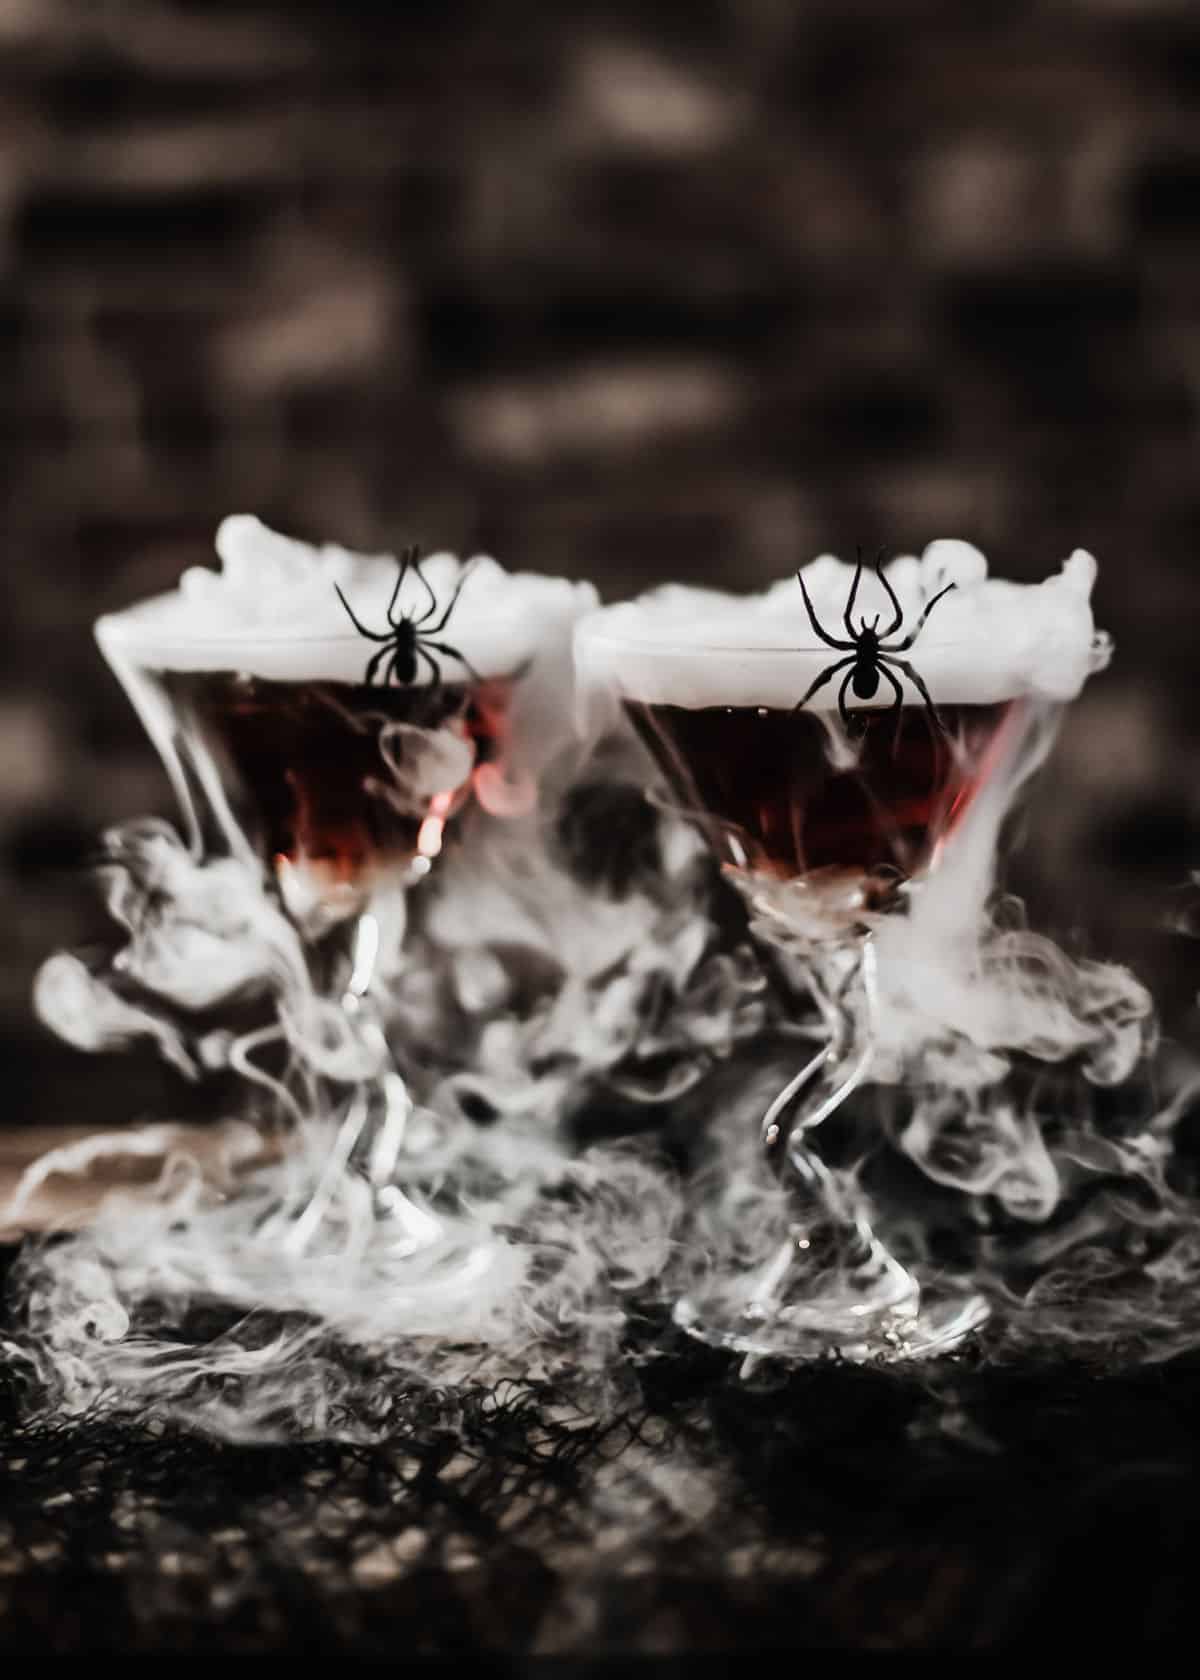 2 martini glasses with dark drinks and dry ice smoke, and spider on side of glass.